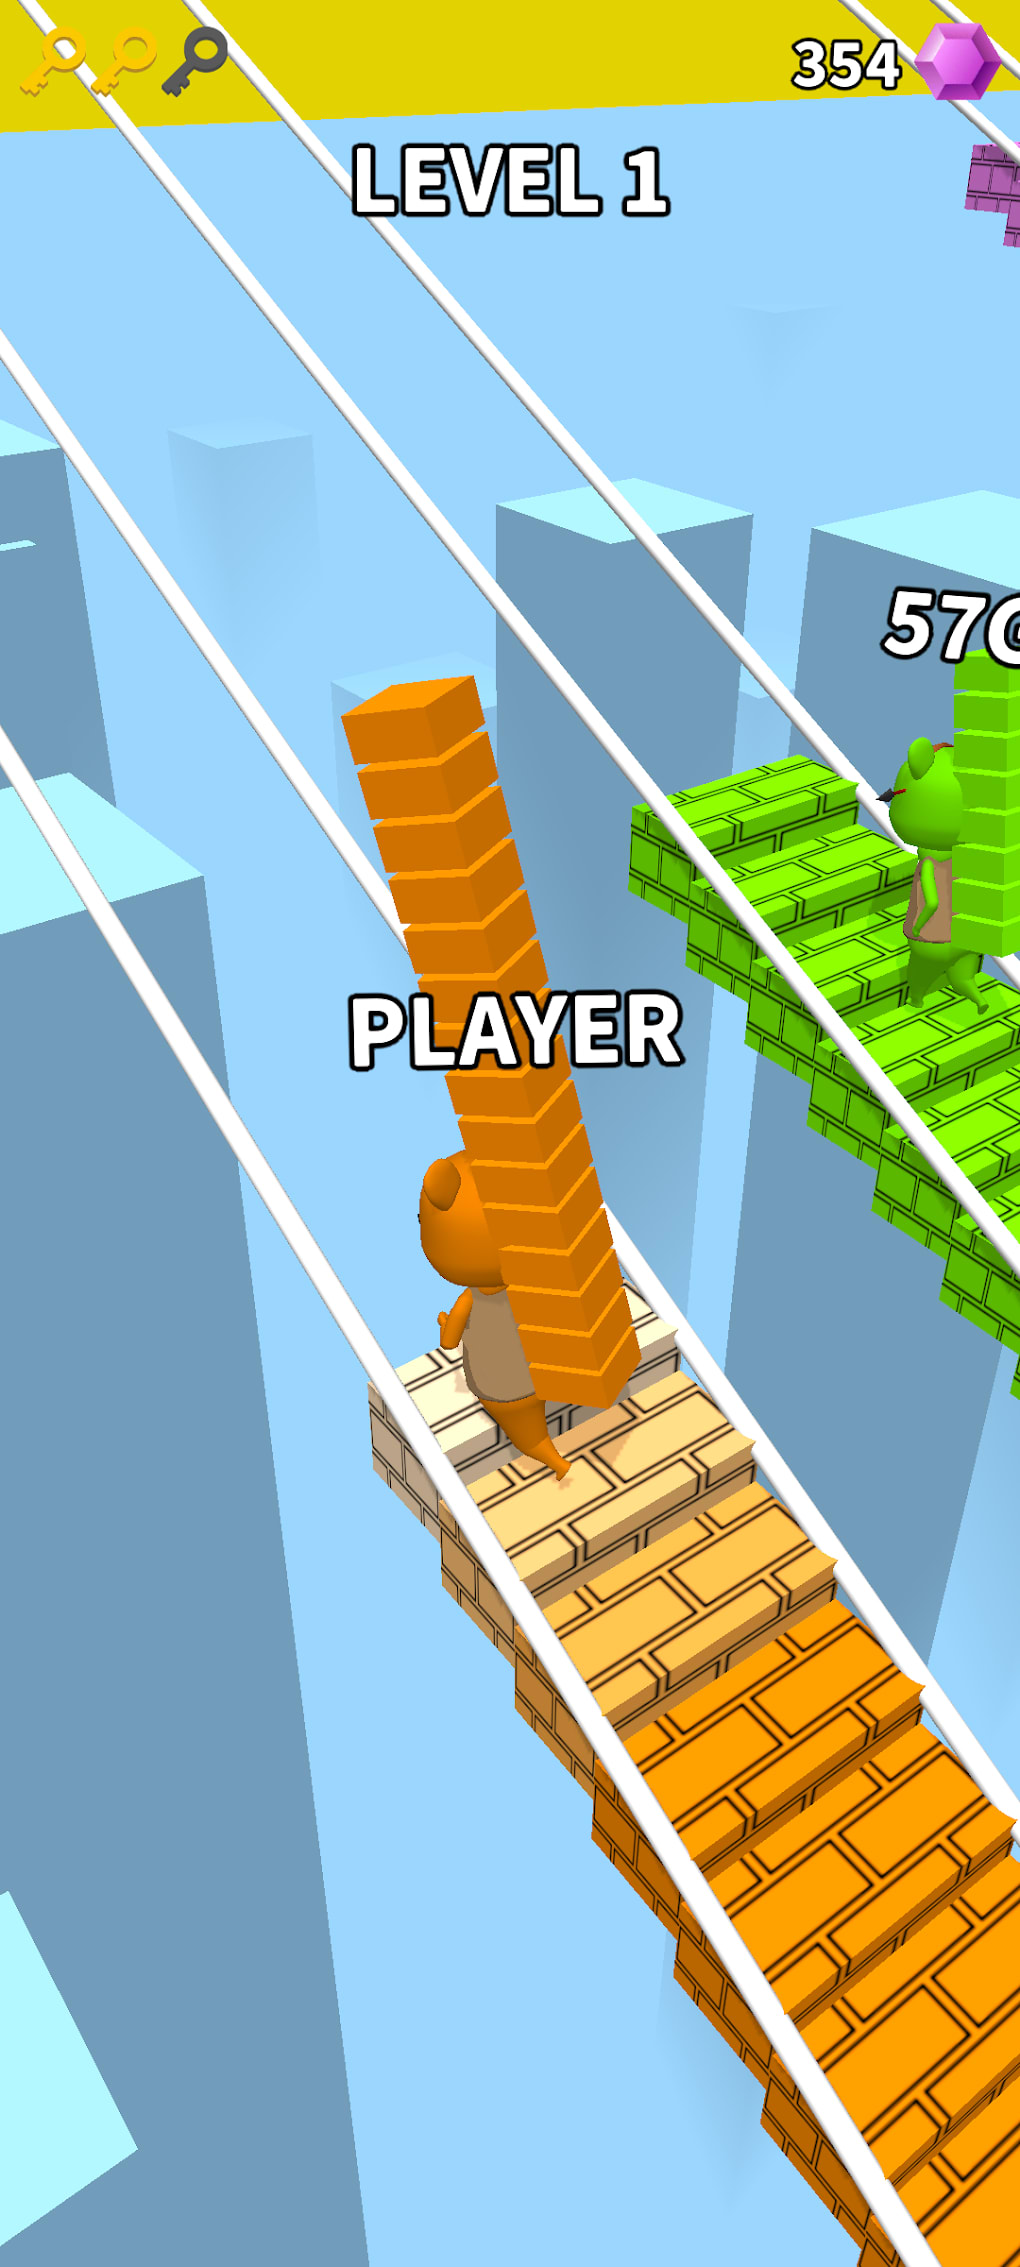 Stair Run Online - Free Play & No Download